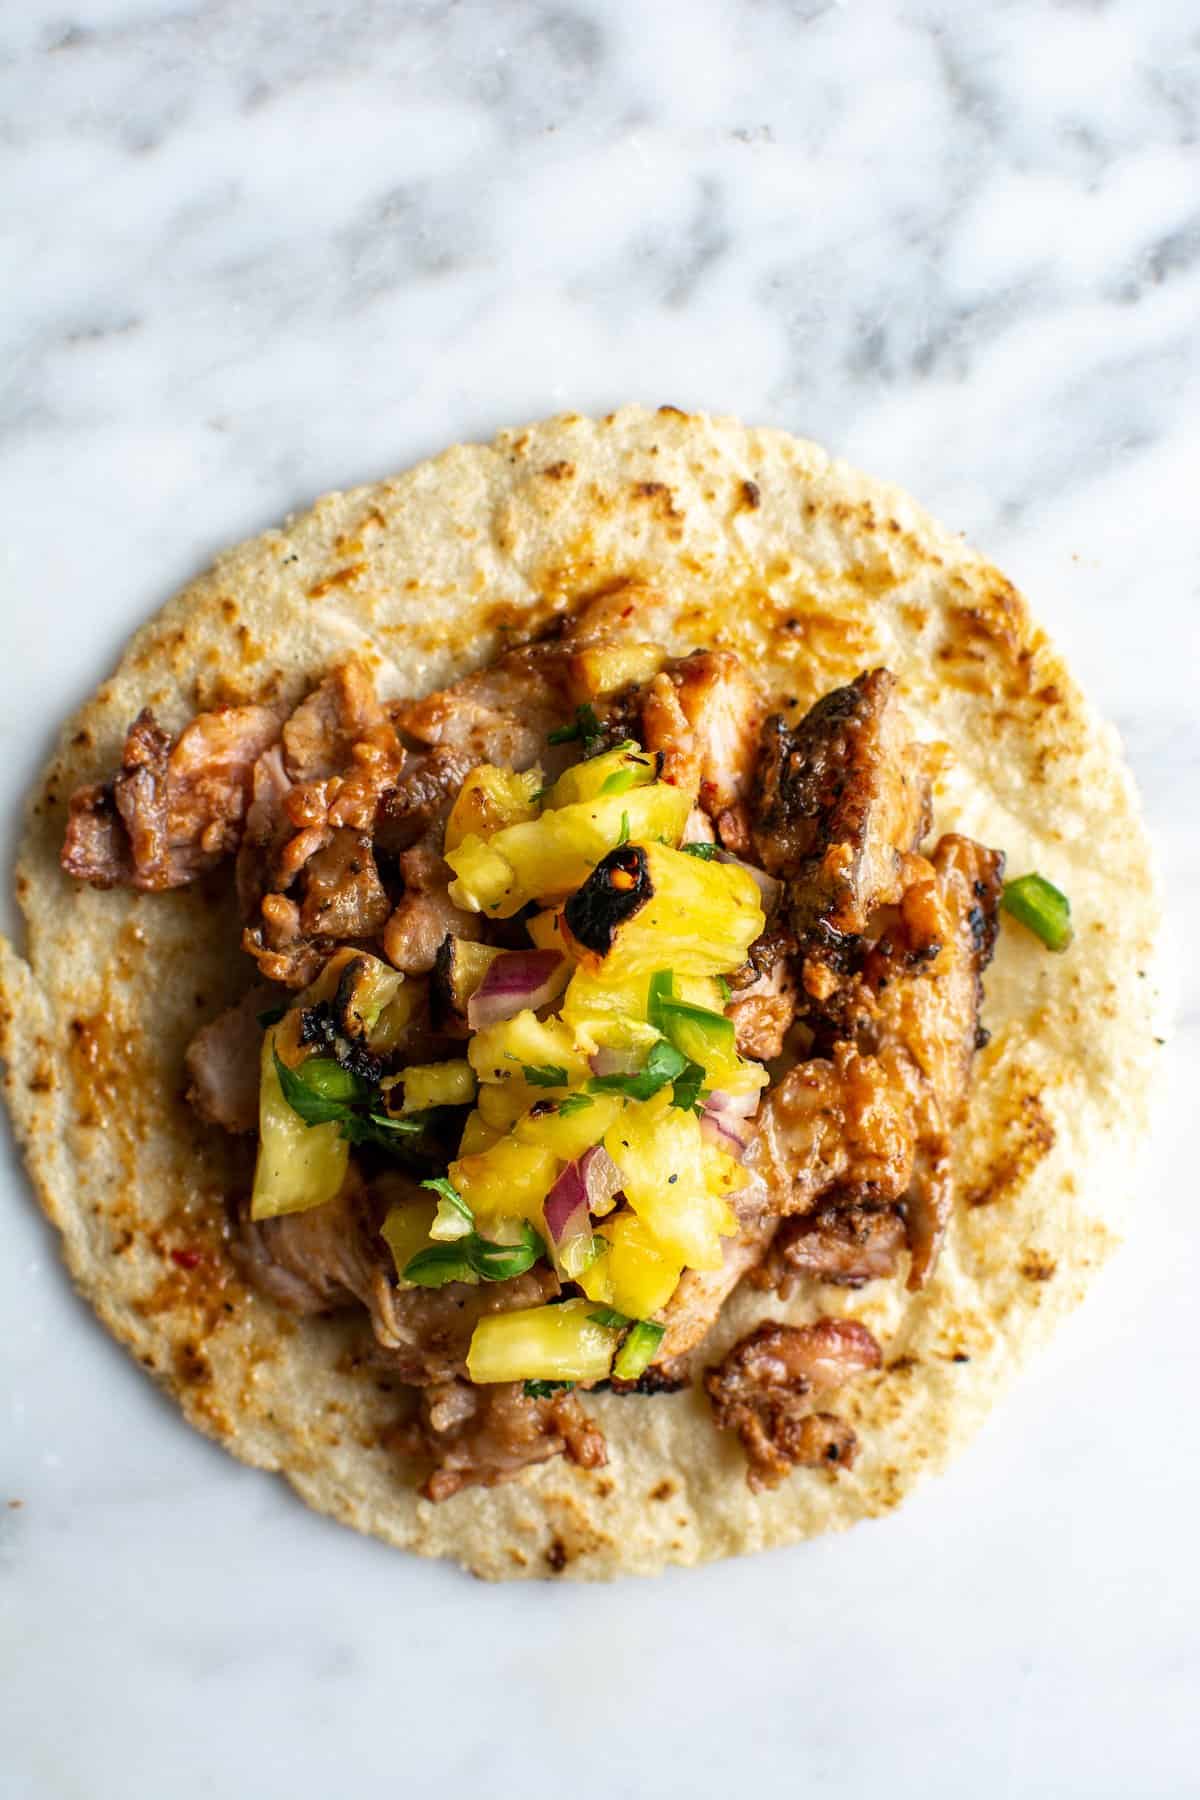 One taco al pastor topped with grilled pineapple salsa sitting on a marble table.